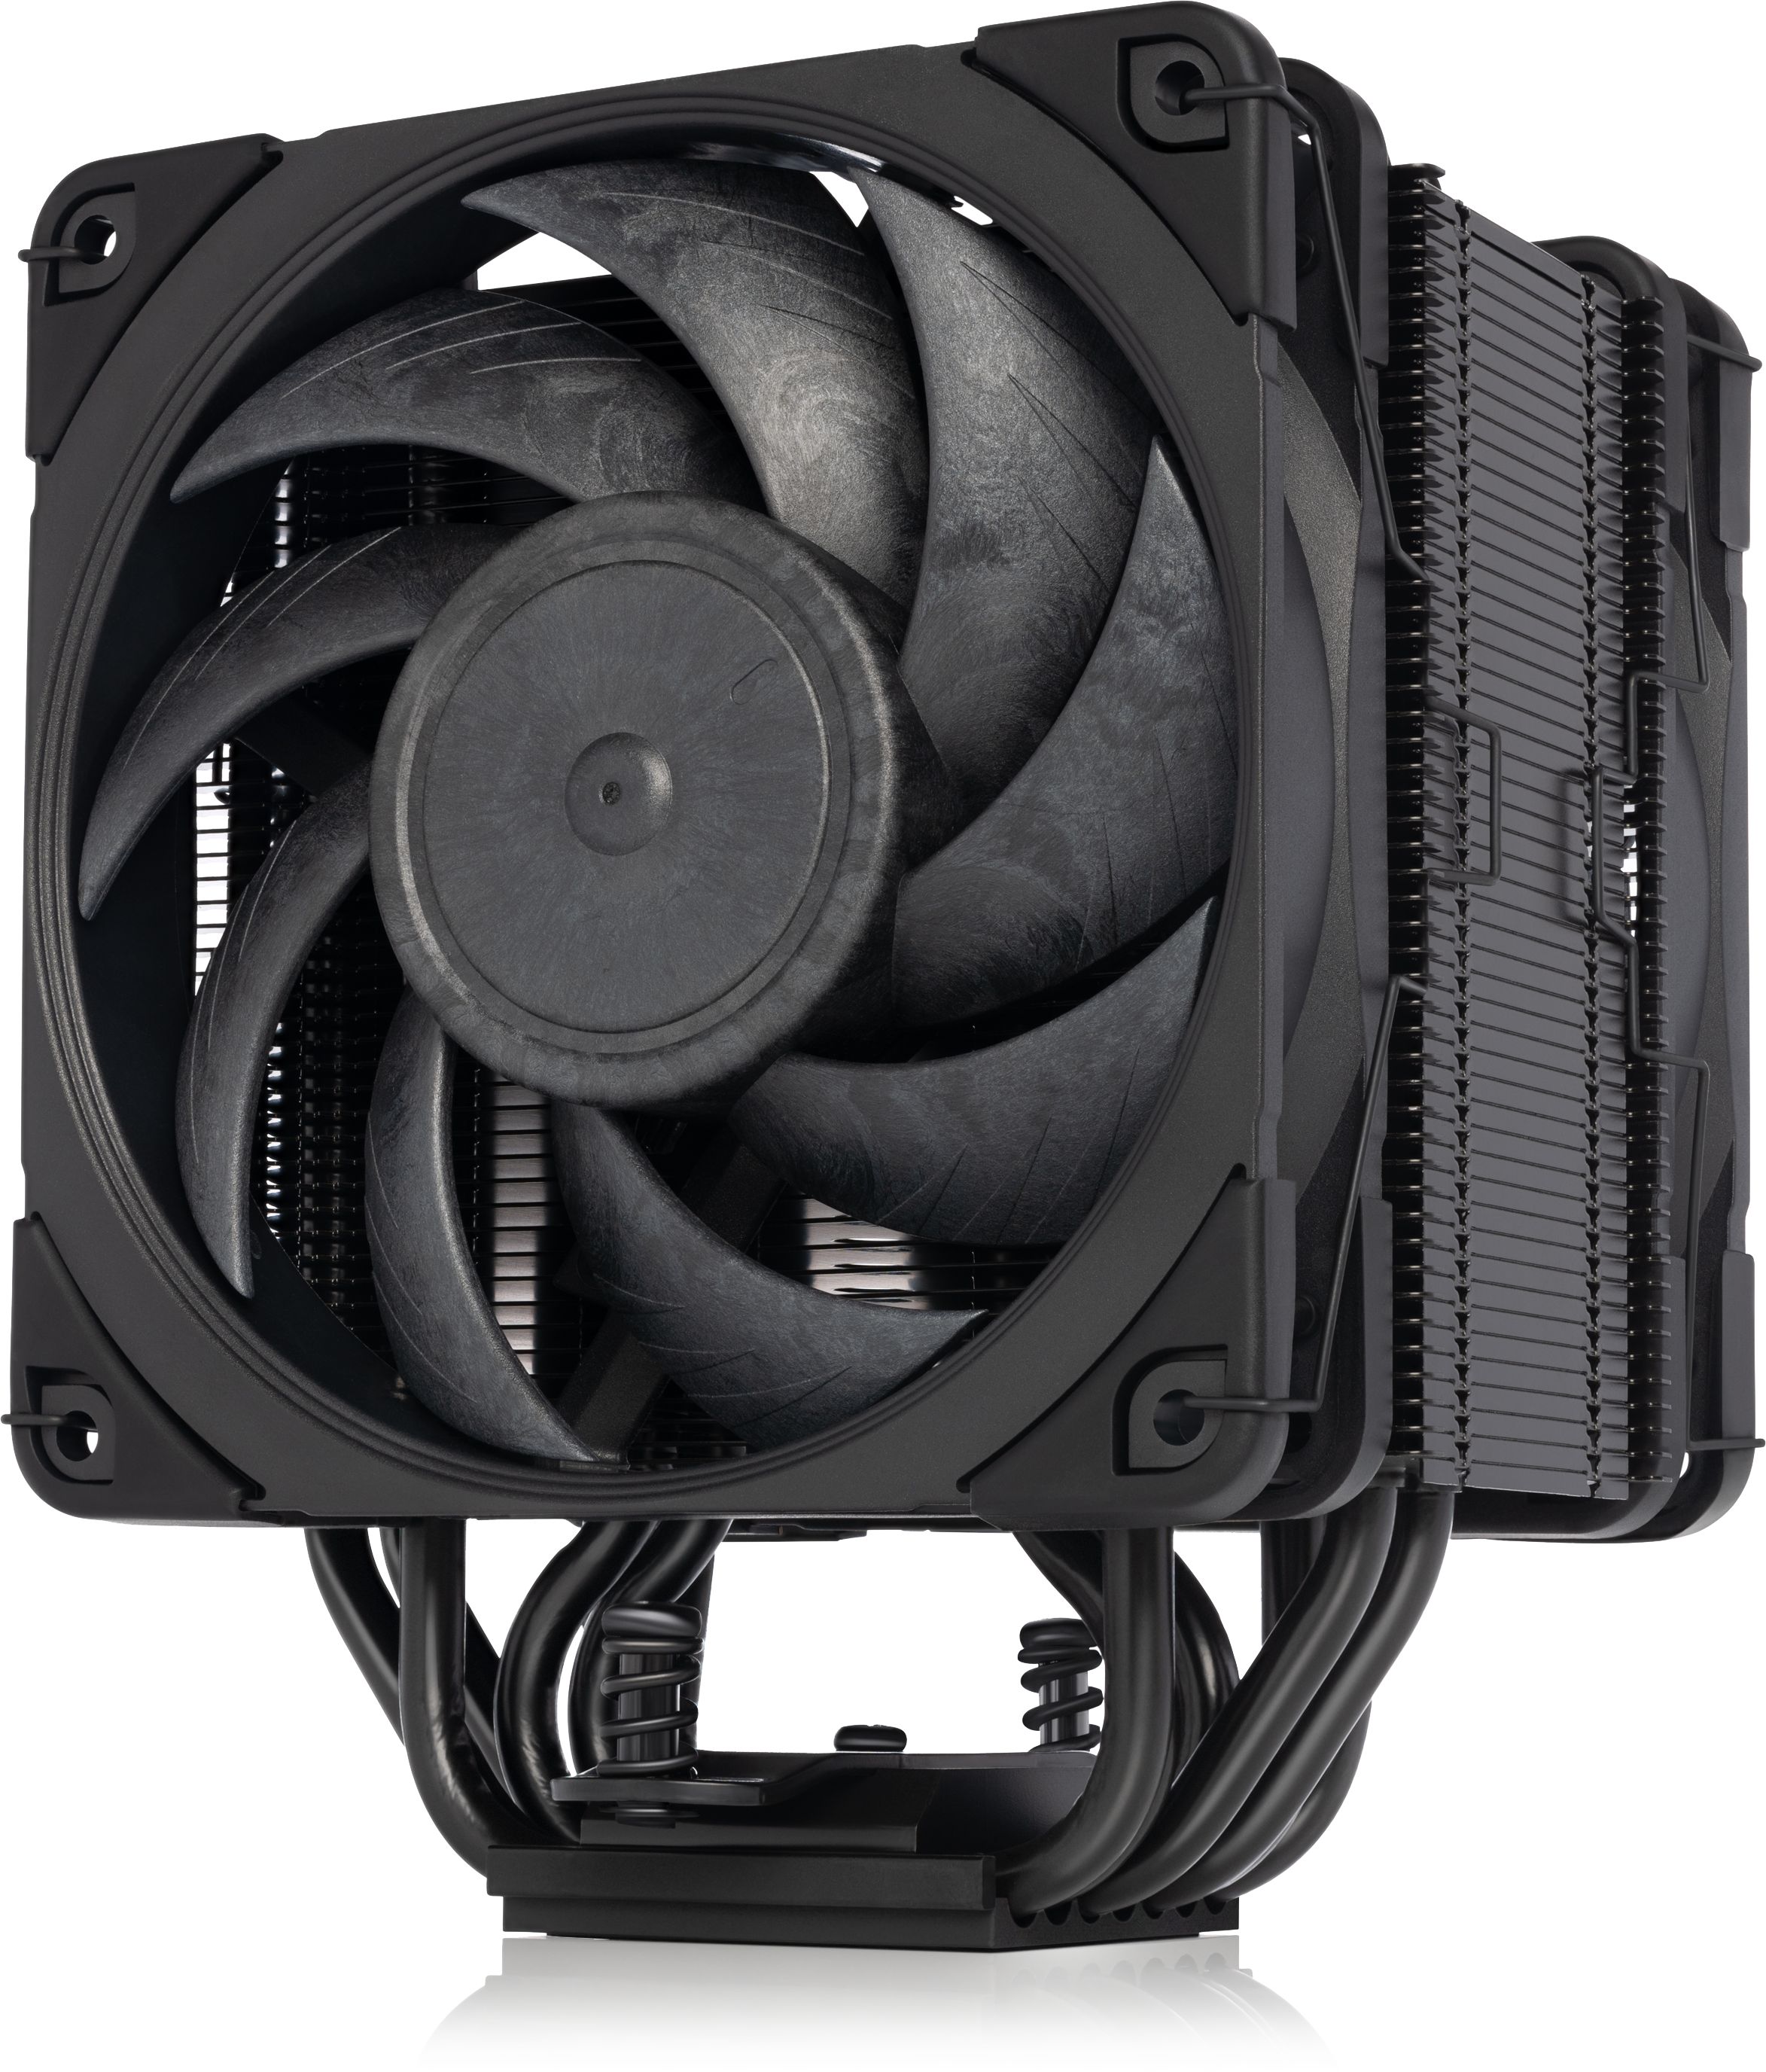 Nh U12a Chromax Black 1mm Cpu Cooler With Two Quiet Nf A12x25 Fans